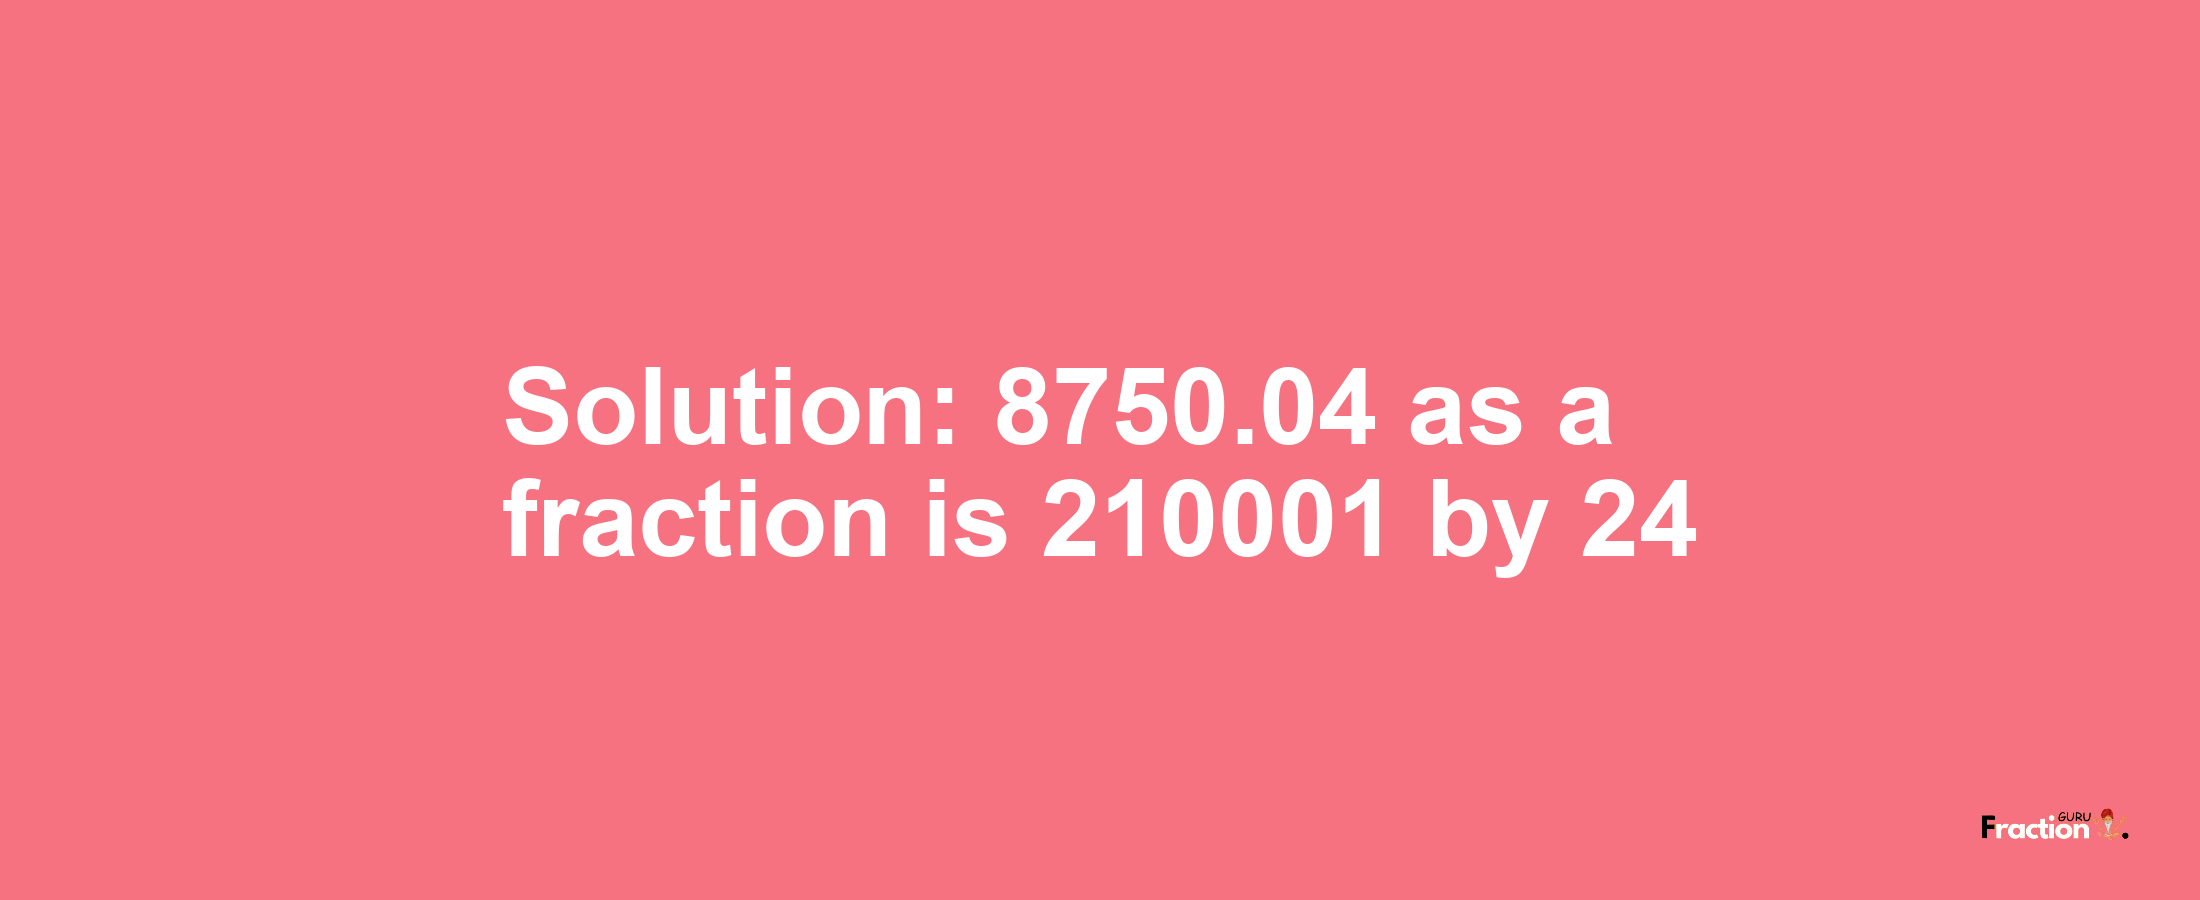 Solution:8750.04 as a fraction is 210001/24